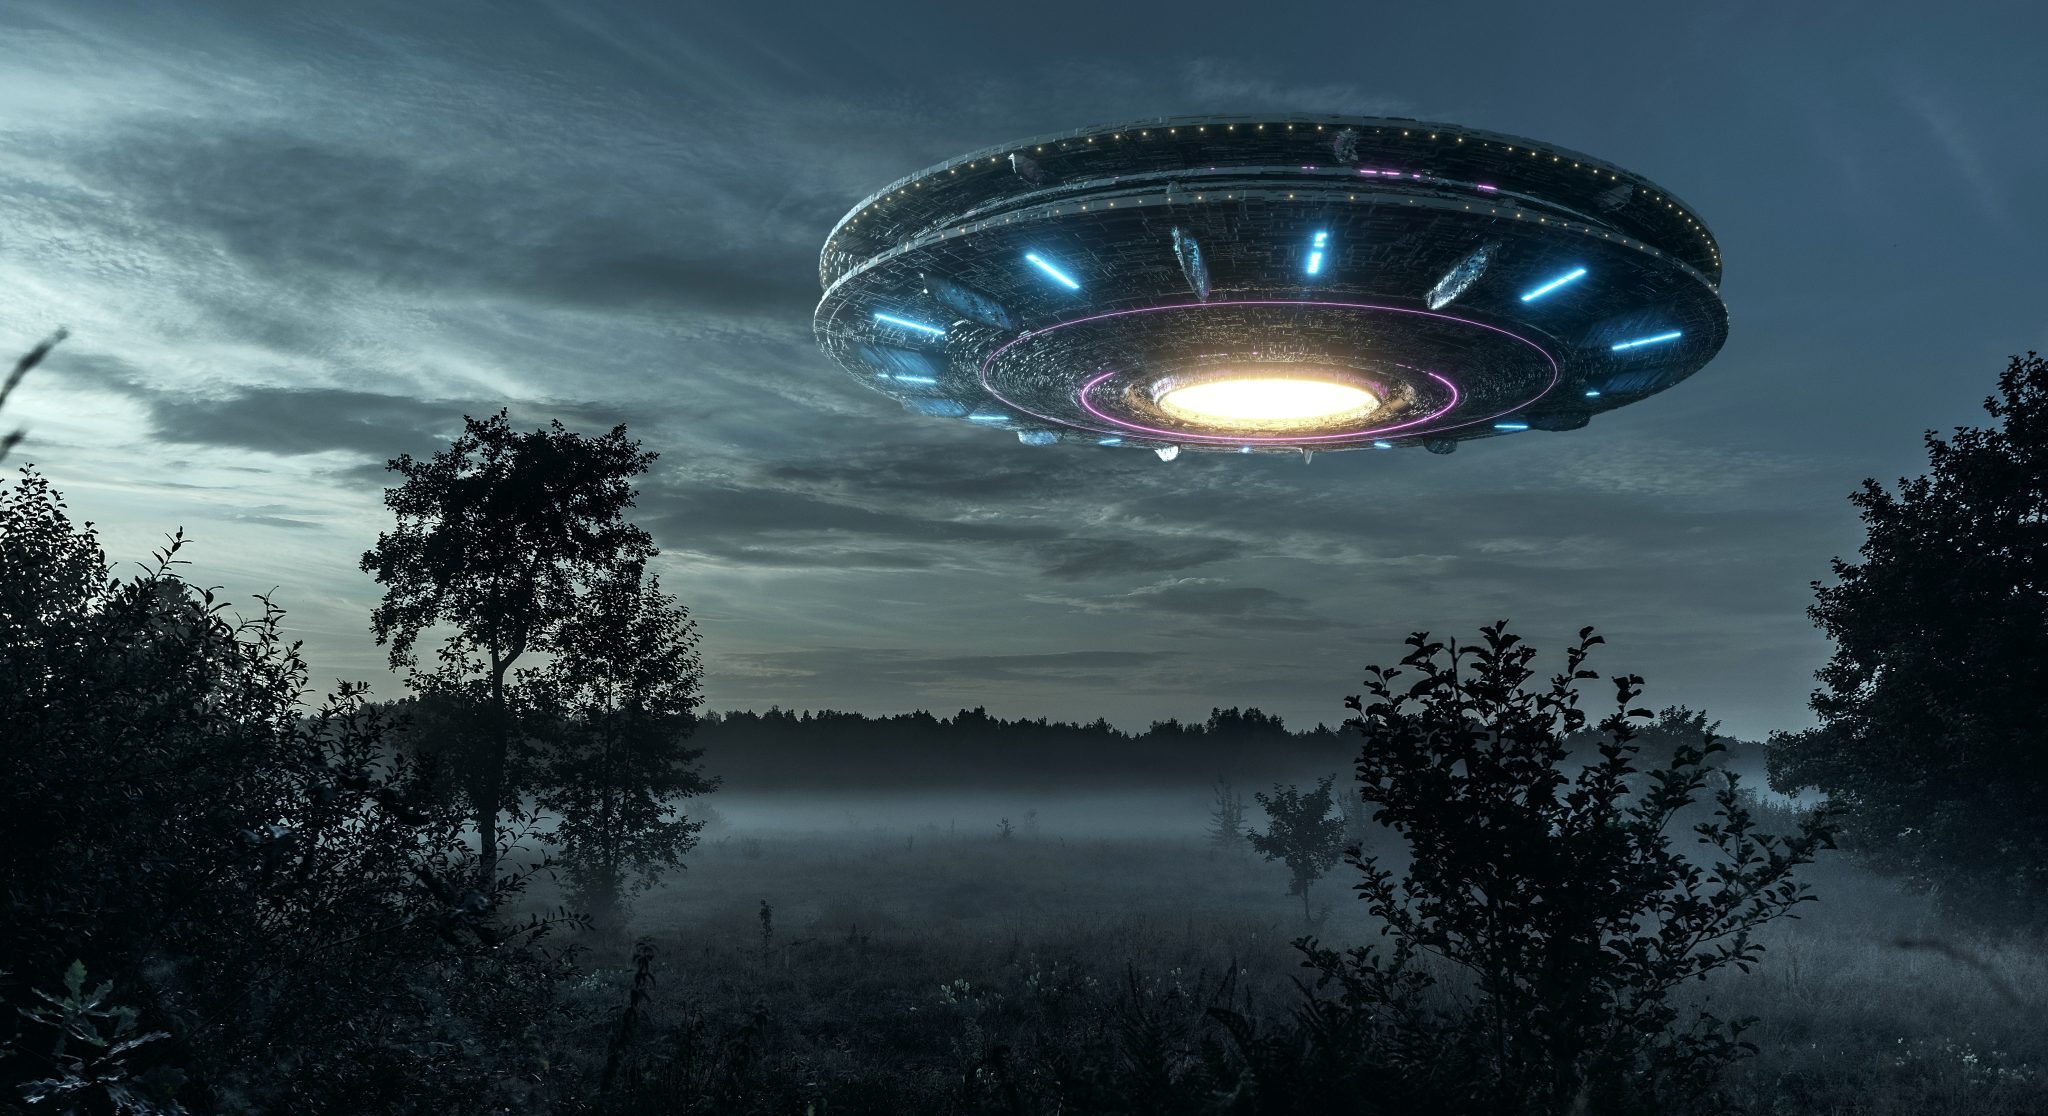 Why are UFO‘s Top Secret?